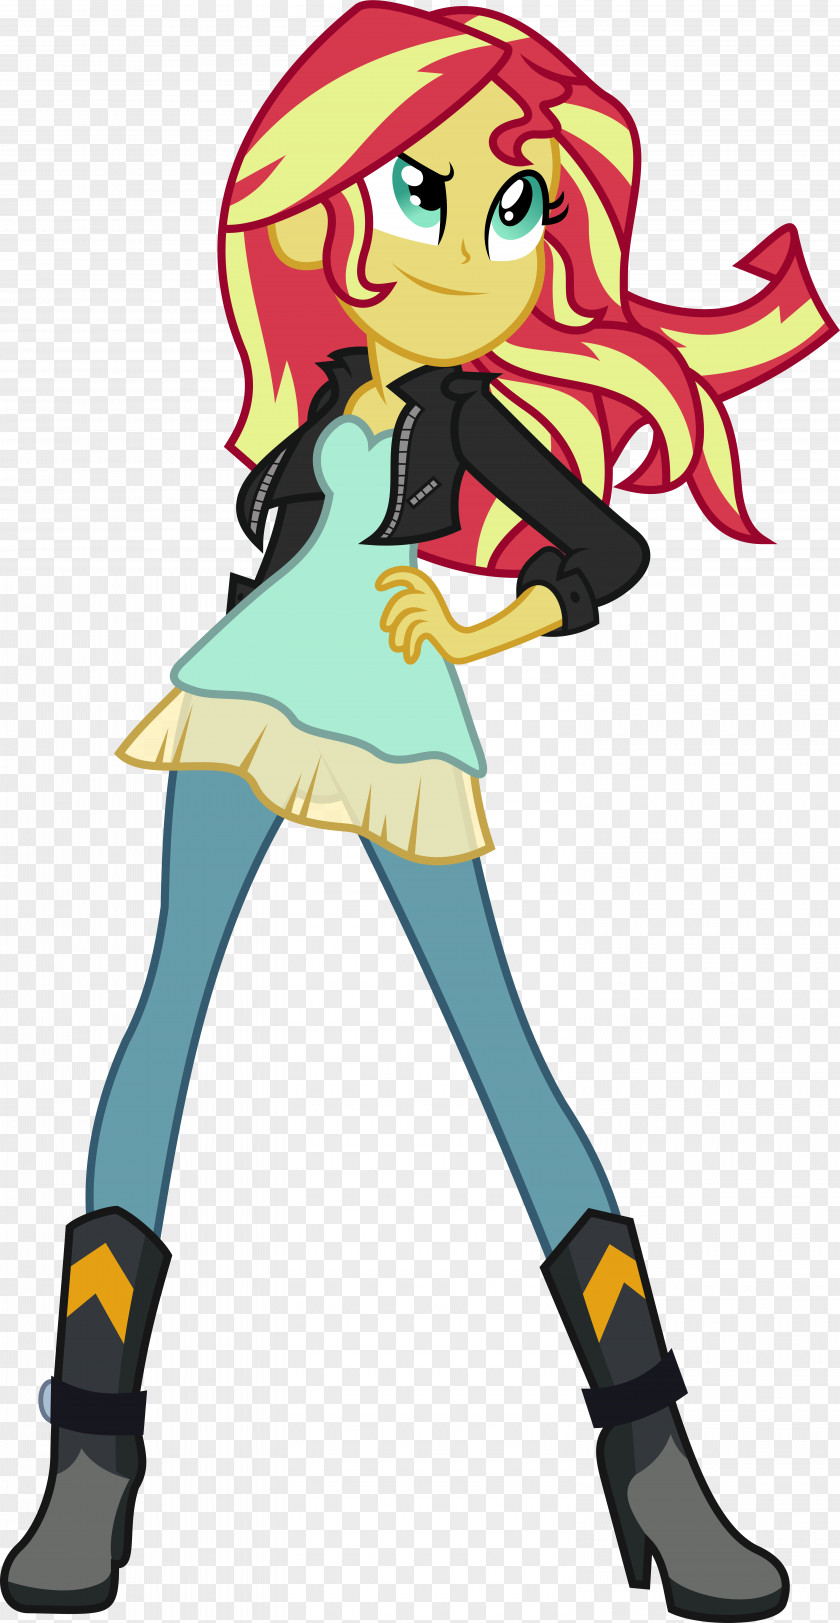 My Little Pony Sunset Shimmer Rarity Pony: Equestria Girls Rainbow Dash PNG